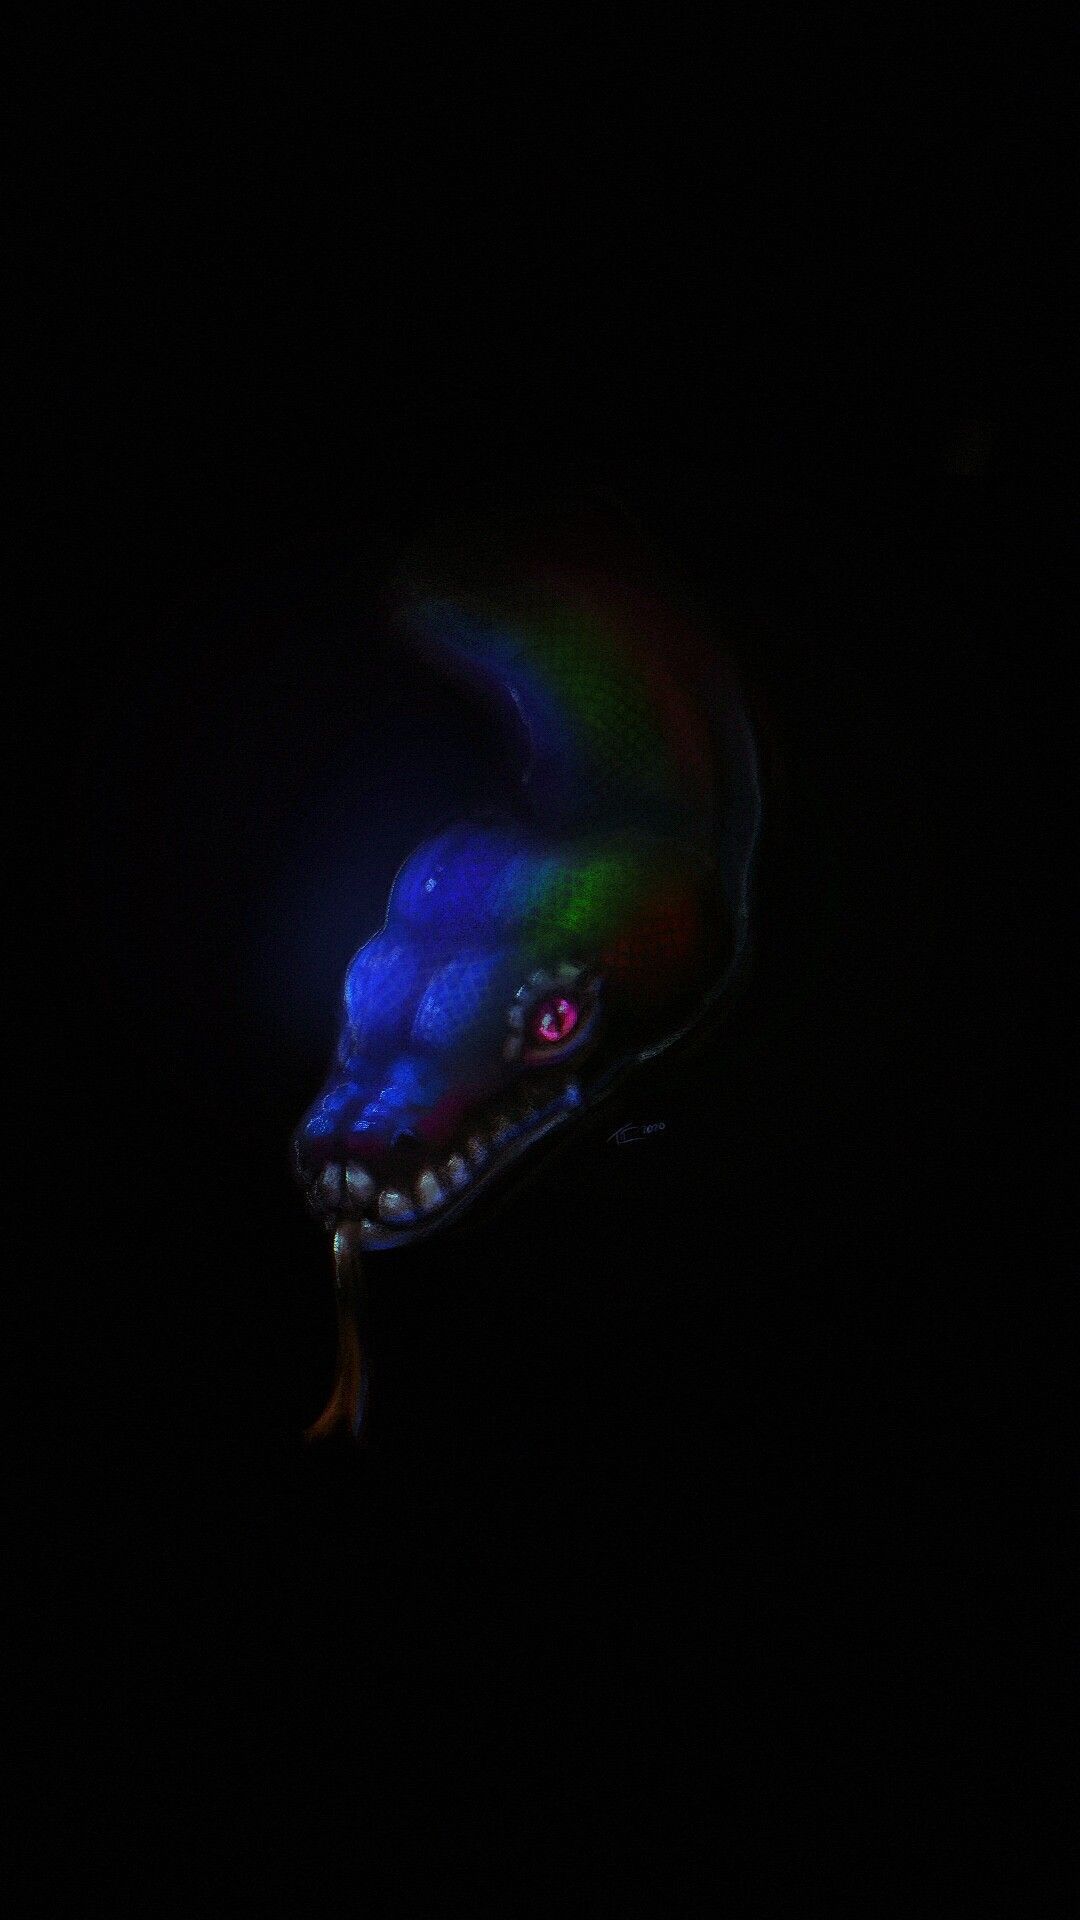 A snake with glowing eyes in the dark - Snake